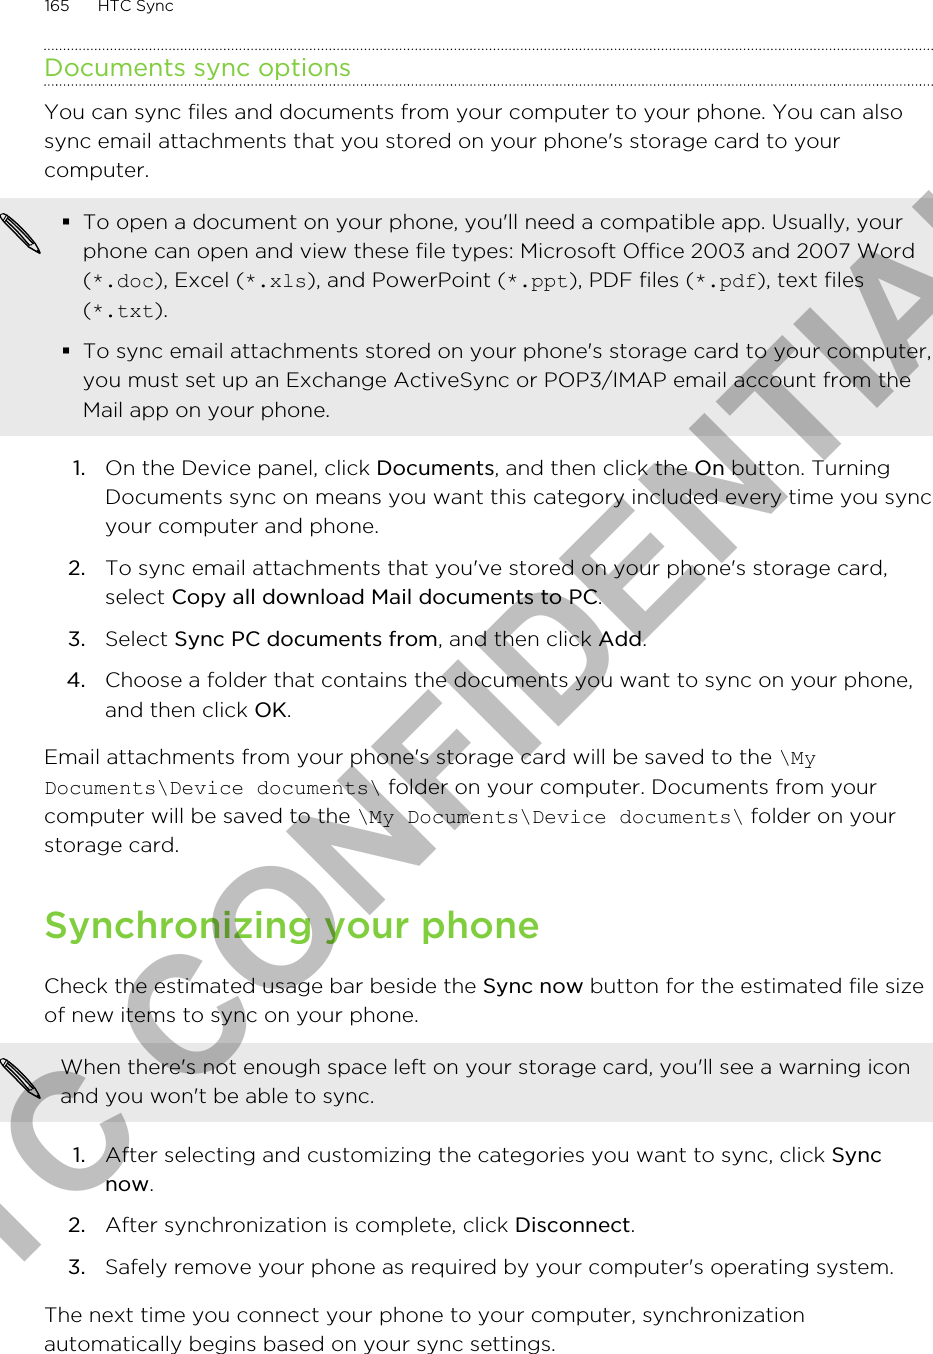 Documents sync optionsYou can sync files and documents from your computer to your phone. You can alsosync email attachments that you stored on your phone&apos;s storage card to yourcomputer.§To open a document on your phone, you&apos;ll need a compatible app. Usually, yourphone can open and view these file types: Microsoft Office 2003 and 2007 Word(*.doc), Excel (*.xls), and PowerPoint (*.ppt), PDF files (*.pdf), text files(*.txt).§To sync email attachments stored on your phone&apos;s storage card to your computer,you must set up an Exchange ActiveSync or POP3/IMAP email account from theMail app on your phone.1. On the Device panel, click Documents, and then click the On button. TurningDocuments sync on means you want this category included every time you syncyour computer and phone.2. To sync email attachments that you&apos;ve stored on your phone&apos;s storage card,select Copy all download Mail documents to PC. 3. Select Sync PC documents from, and then click Add.4. Choose a folder that contains the documents you want to sync on your phone,and then click OK.Email attachments from your phone&apos;s storage card will be saved to the \MyDocuments\Device documents\ folder on your computer. Documents from yourcomputer will be saved to the \My Documents\Device documents\ folder on yourstorage card.Synchronizing your phoneCheck the estimated usage bar beside the Sync now button for the estimated file sizeof new items to sync on your phone.When there&apos;s not enough space left on your storage card, you&apos;ll see a warning iconand you won&apos;t be able to sync.1. After selecting and customizing the categories you want to sync, click Syncnow.2. After synchronization is complete, click Disconnect.3. Safely remove your phone as required by your computer&apos;s operating system.The next time you connect your phone to your computer, synchronizationautomatically begins based on your sync settings.165 HTC SyncHTC CONFIDENTIAL